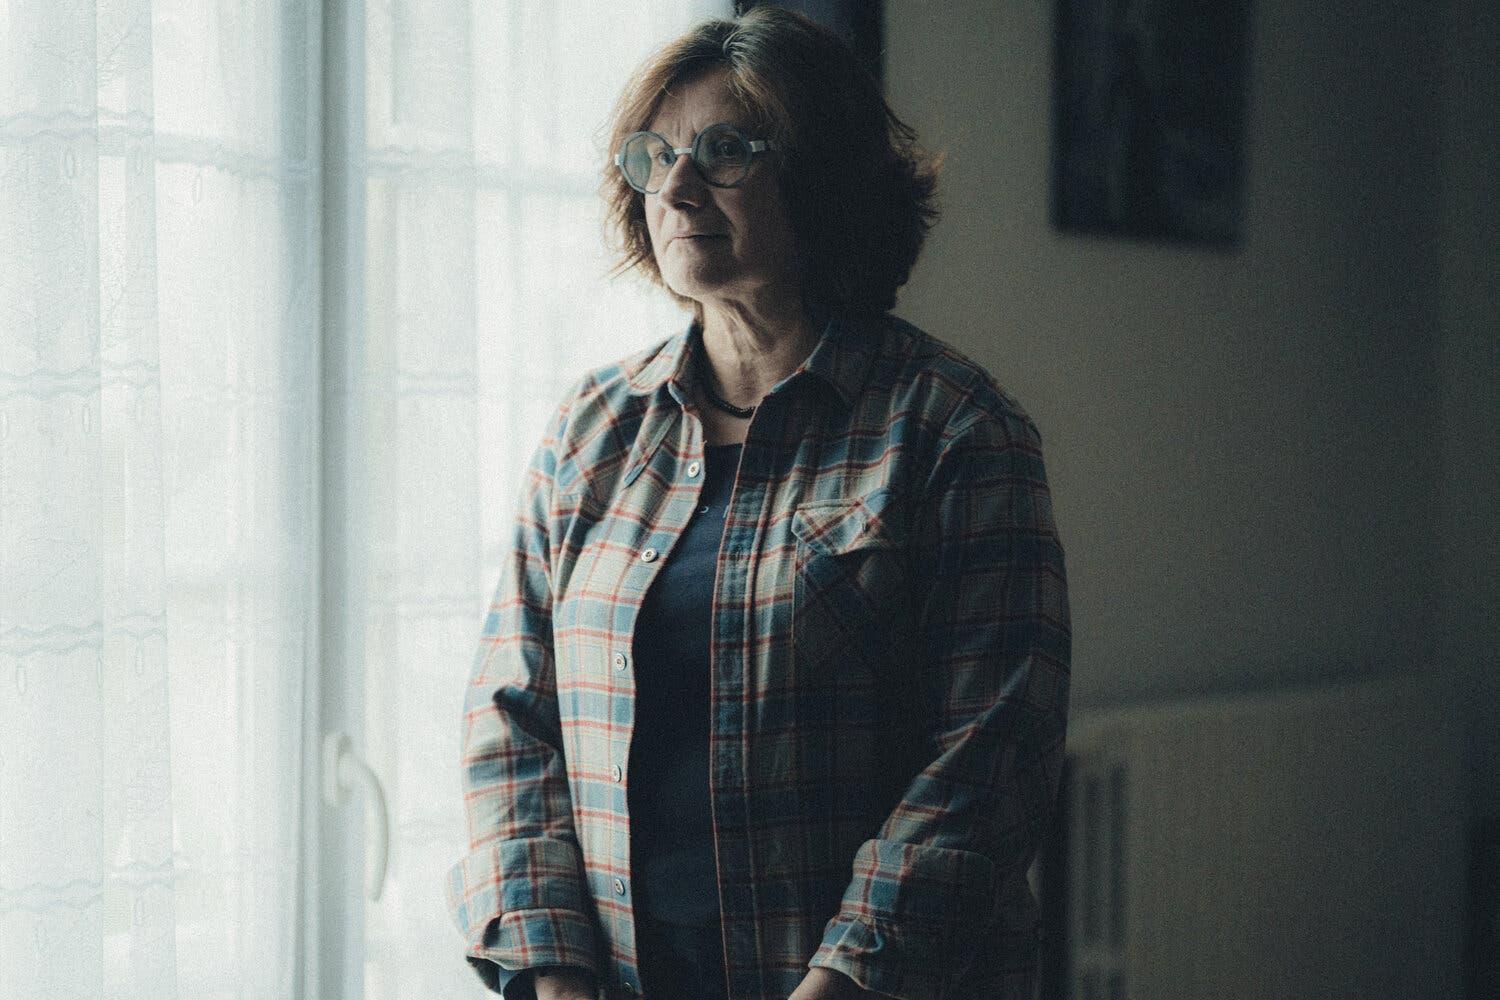 Christine Jagueneau, wearing a plaid shirt and glasses, stands in front of a window in her home in Liniez, France.